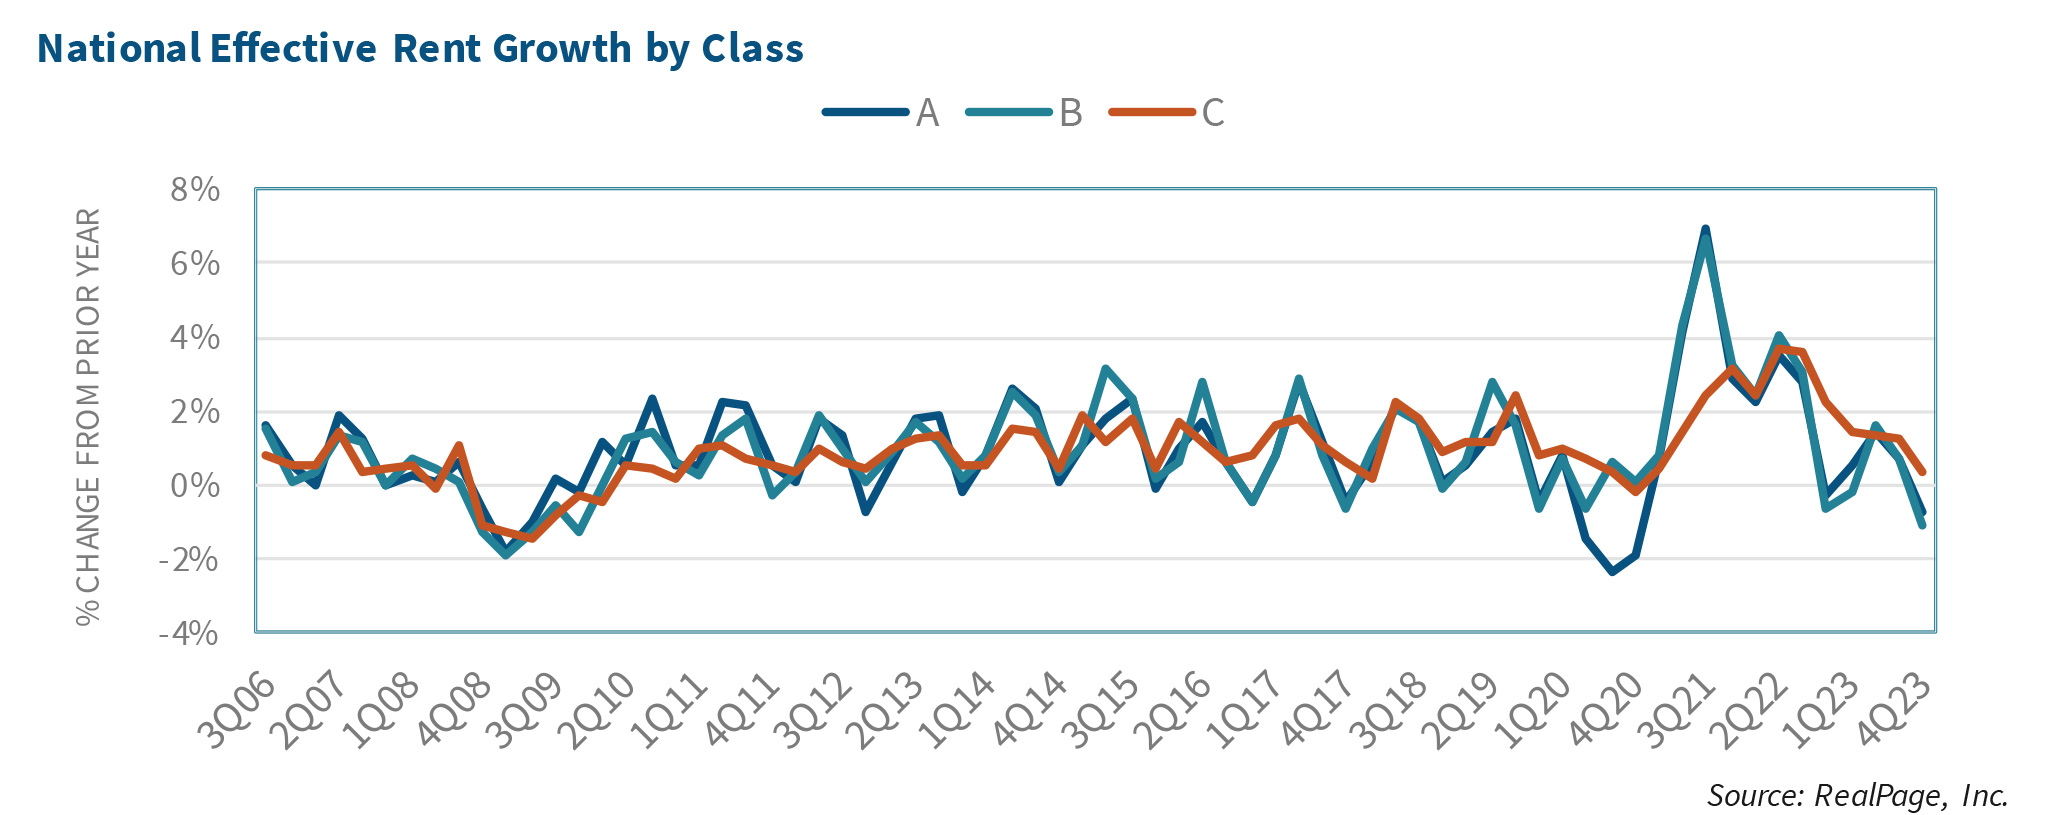 National Effective Rent Growth by Class